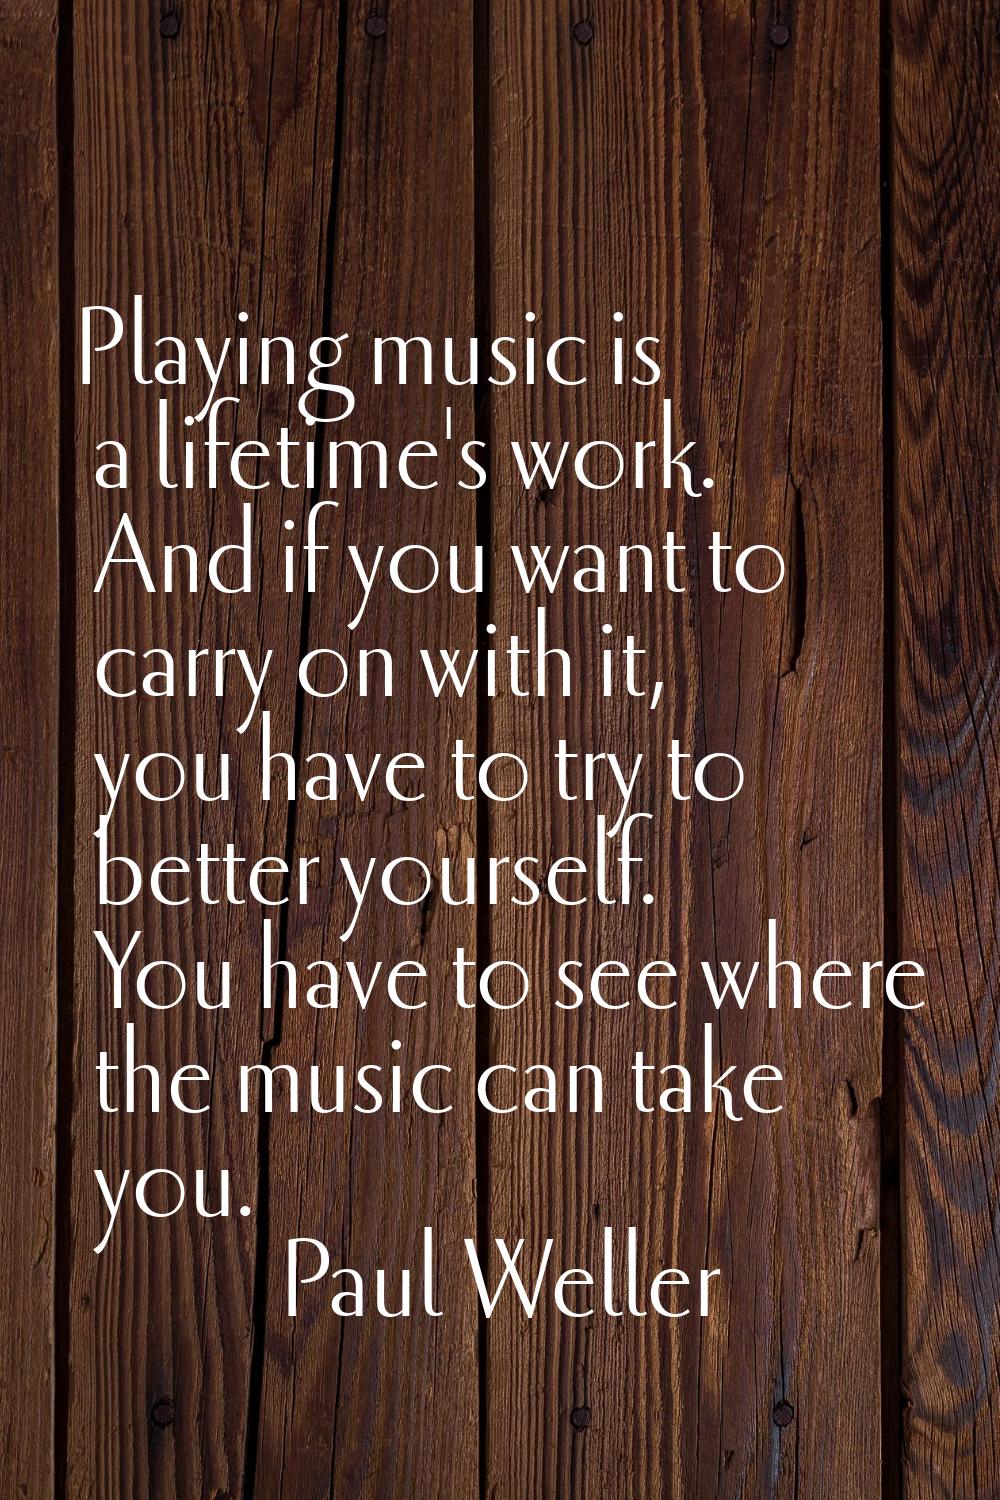 Playing music is a lifetime's work. And if you want to carry on with it, you have to try to better 